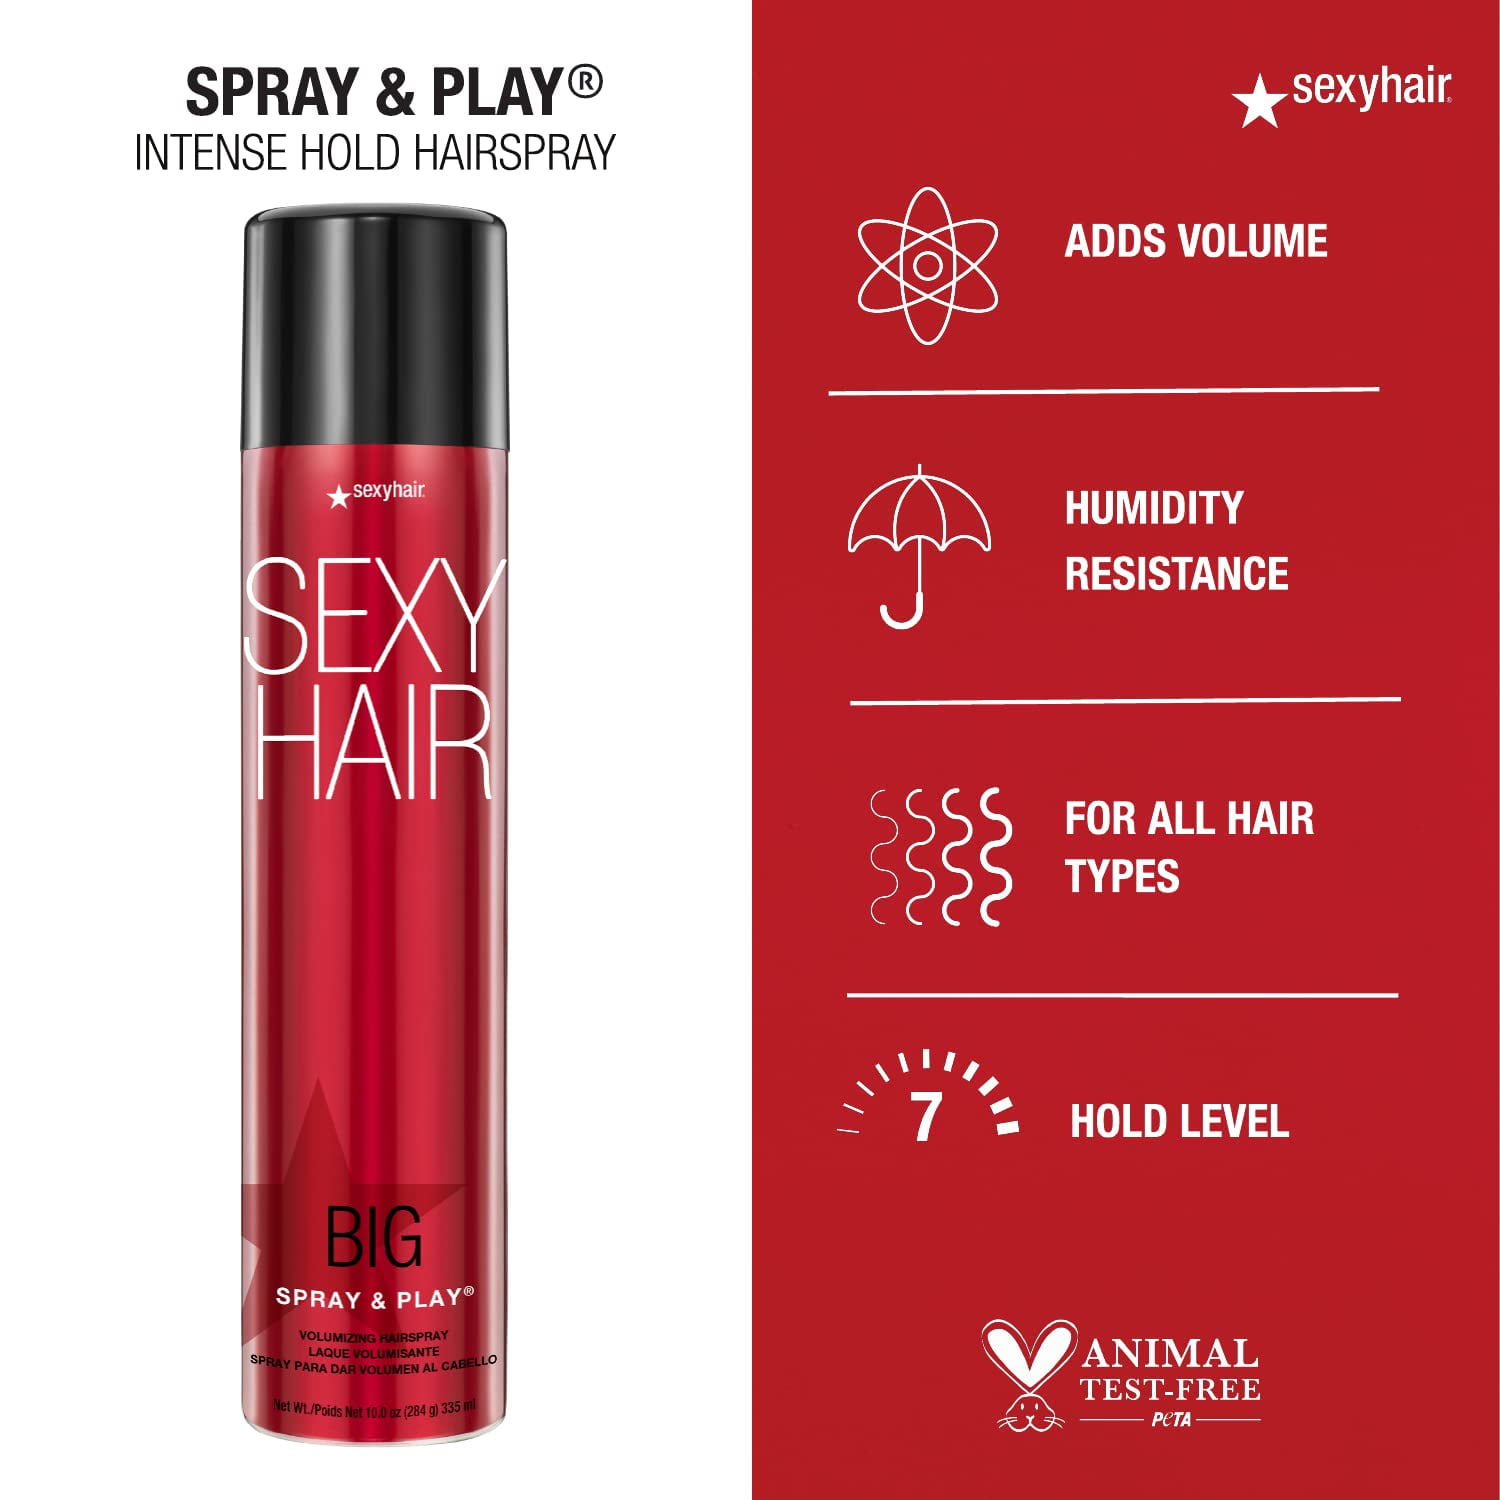  SexyHair Big Spray & Play Lush Life Scented Volumizing  Hairspray, Hold and Shine Up to 72 Hour Humidity Resistance for All Hair  Types, 10 oz. : Beauty & Personal Care